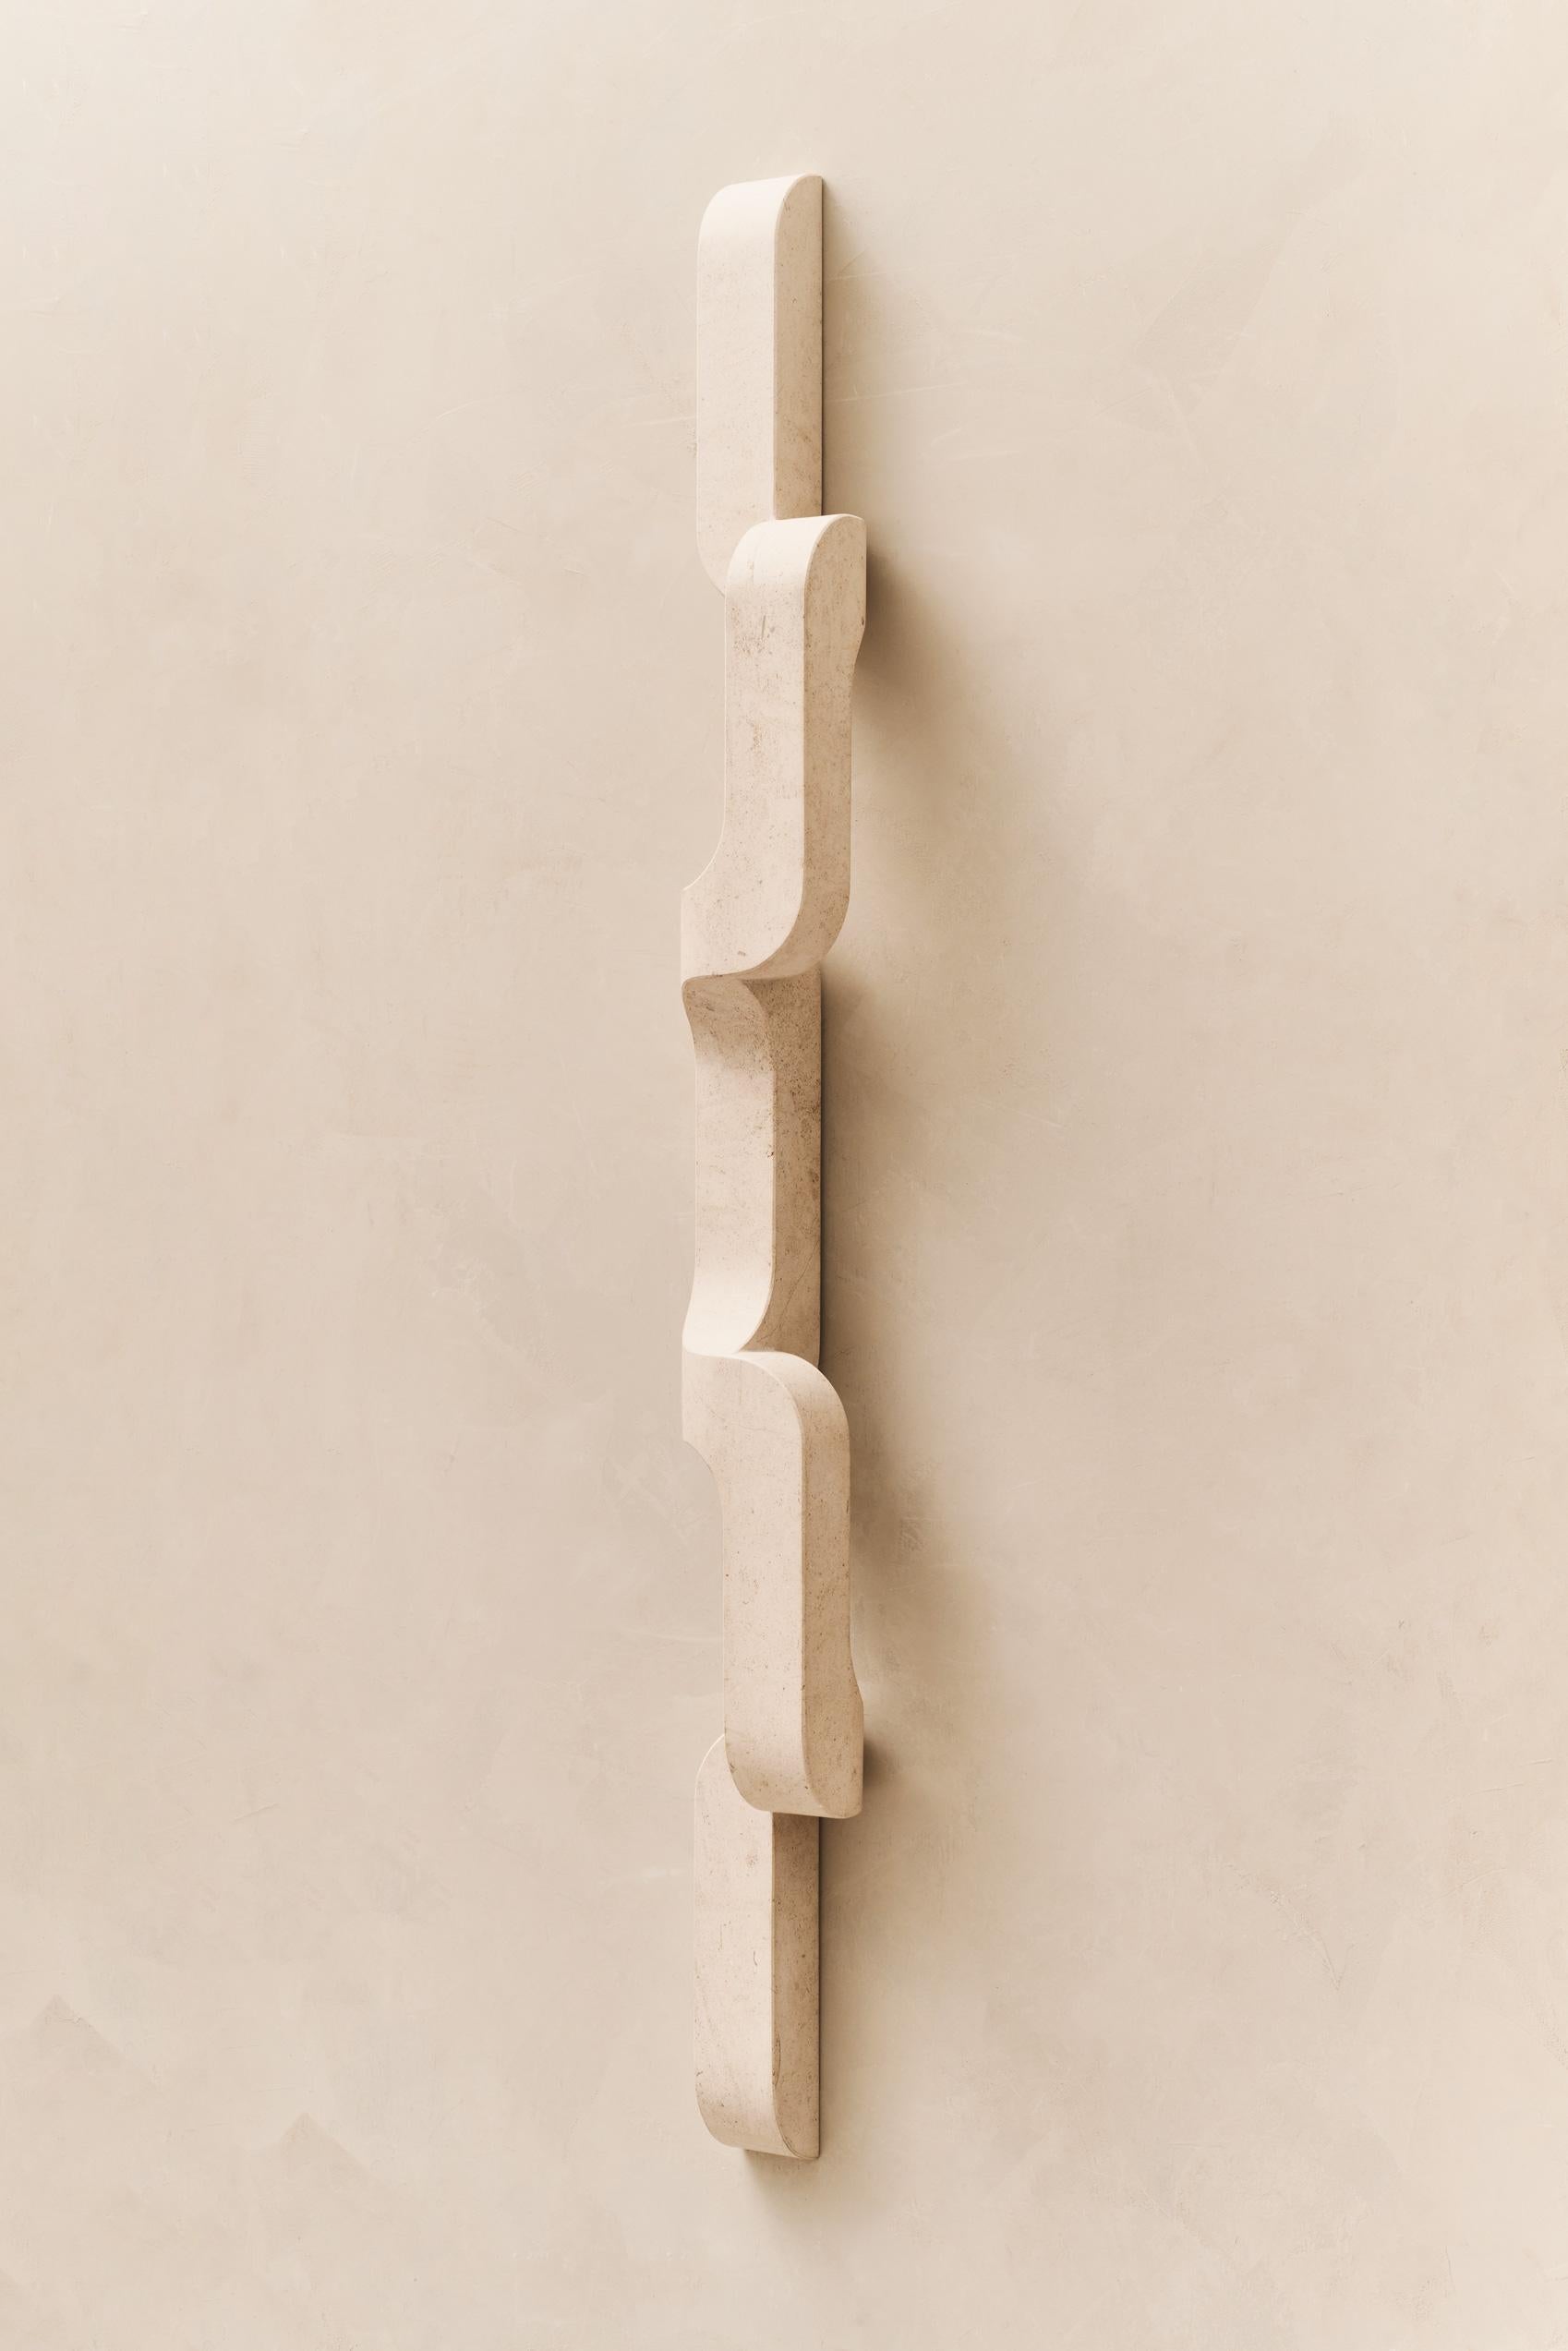 In this solid stone wall sconce, generous curves are paired with crisp edges and the repetition of geometry to create a flow. The sconce snakes up and off the wall, a sculptural lighting piece that's understated, and almost artifact-like. 

This